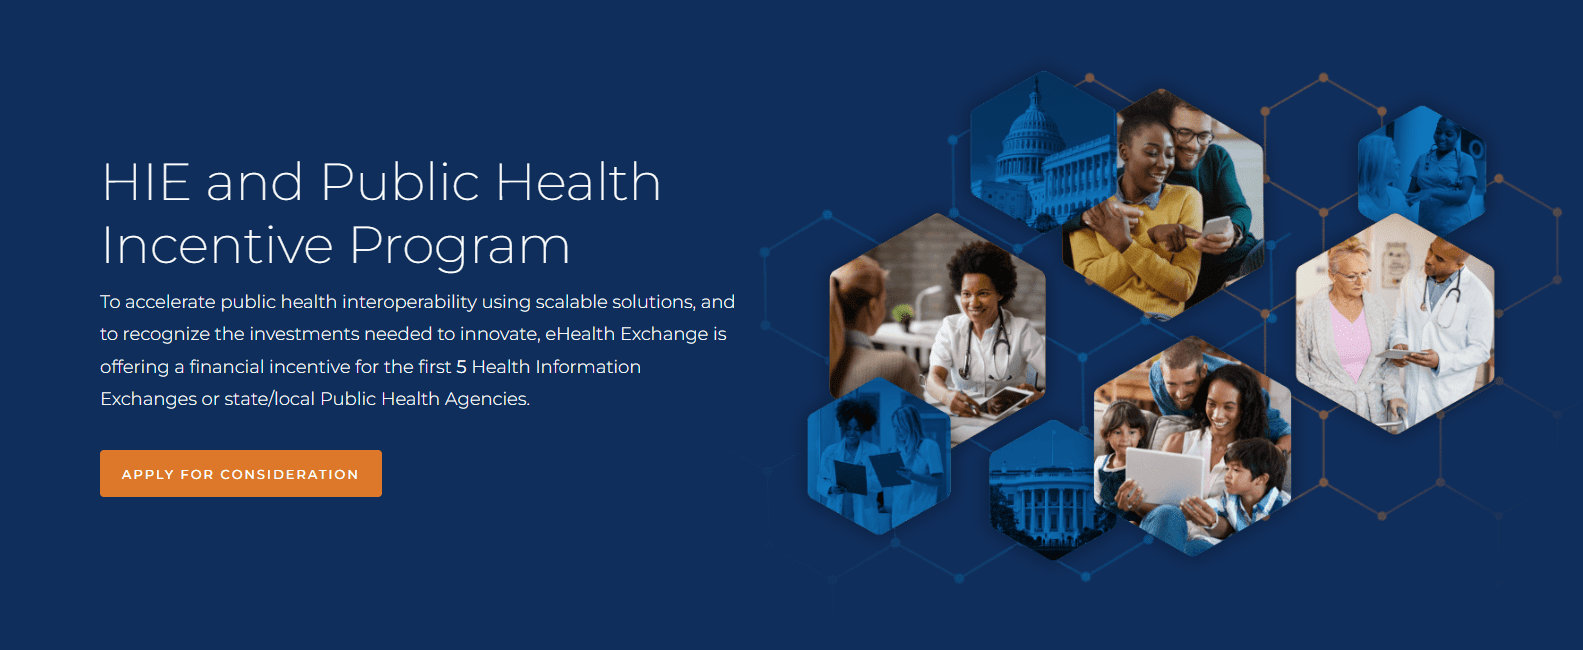 eHealth Exchange Launches Incentive Program for Exchanging Public Health Data